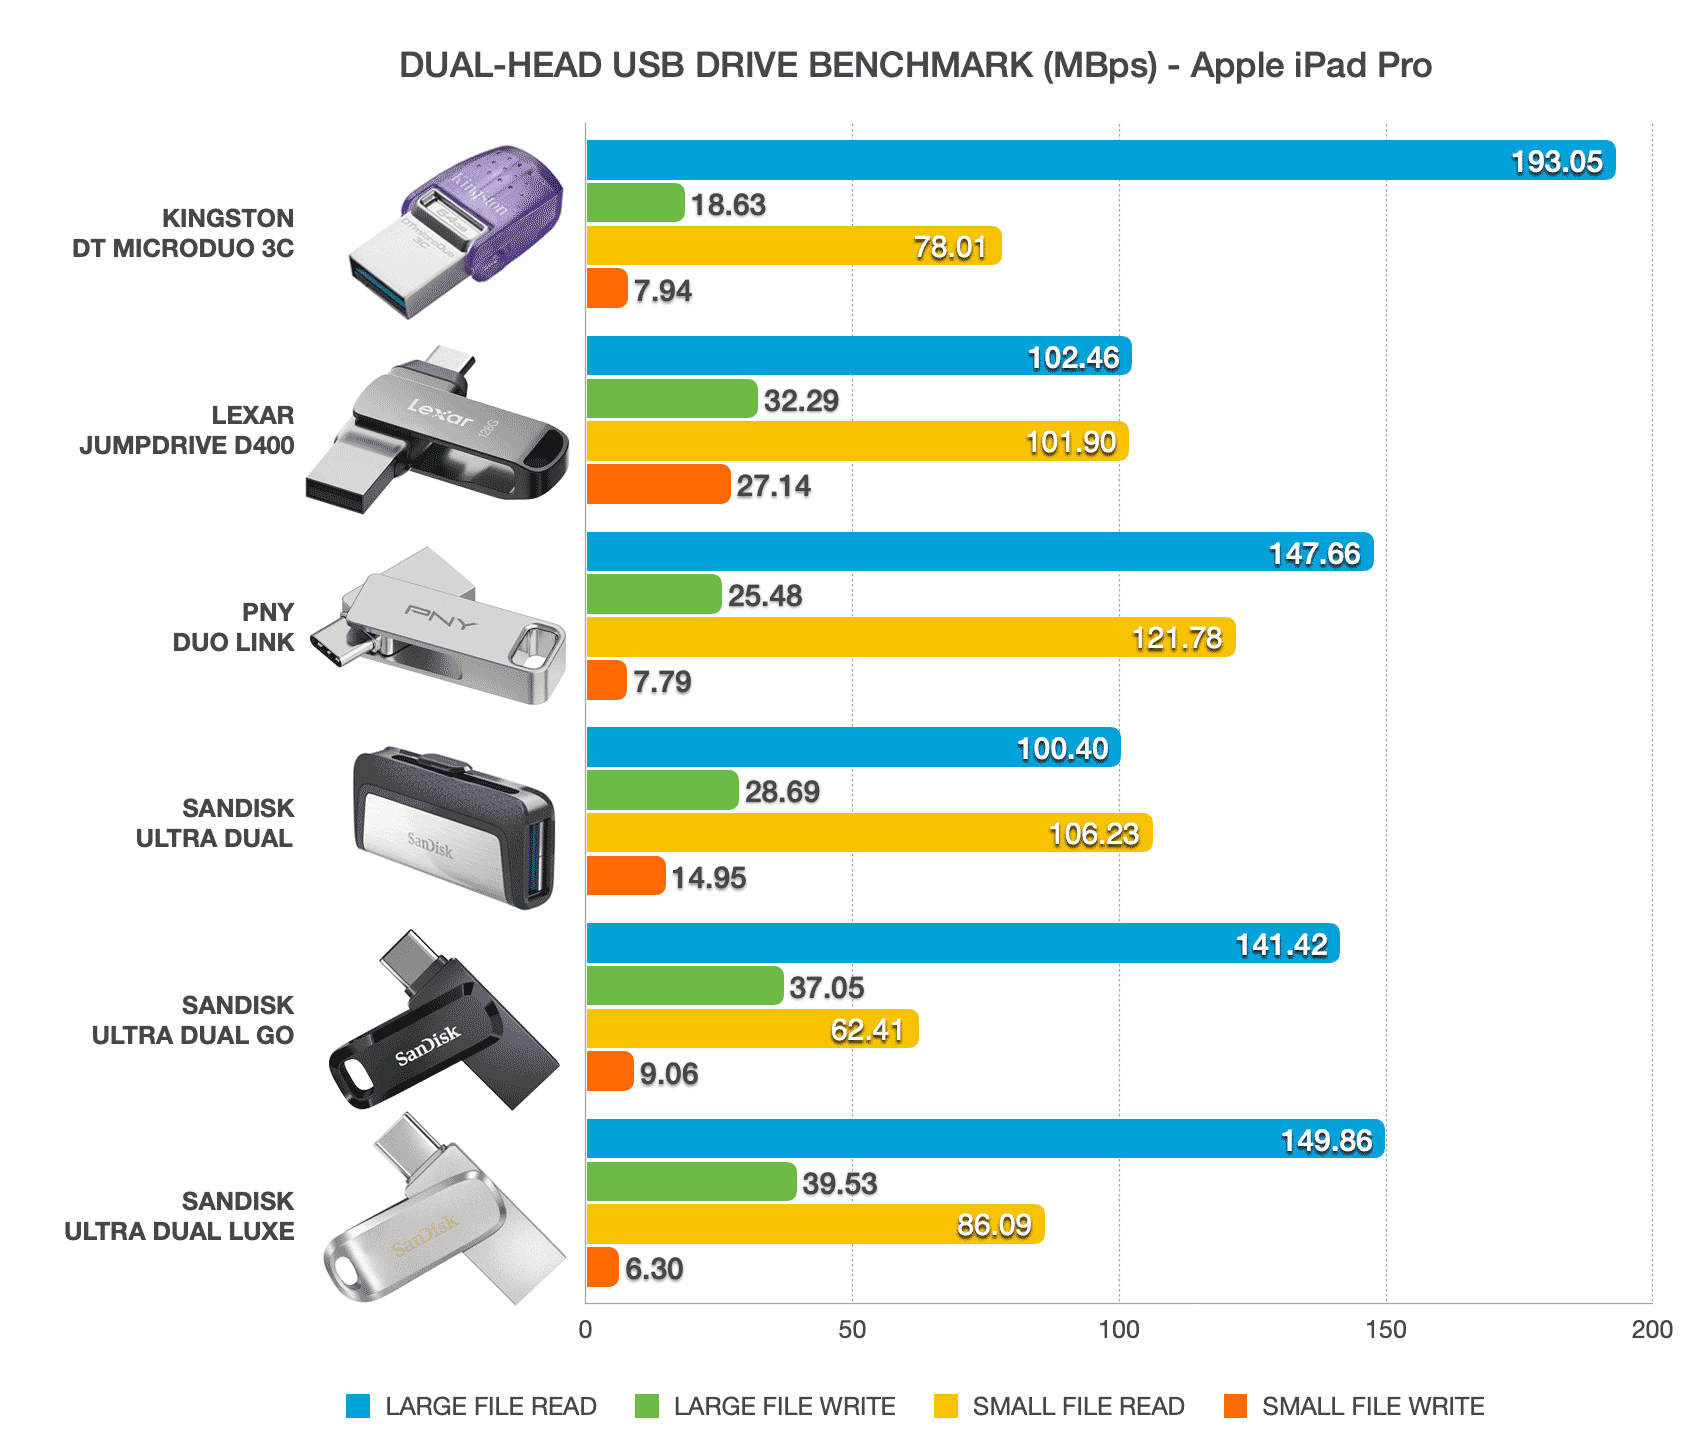 Bar chart comparing USB speeds between Kingston DataTraveler MicroDuo 3C, Lexar JumpDrive D400, PNY Duo Link, Sandisk Ultra Dual, Ultra Dual Go and Ultra Dual Luxe on Apple iPad Pro. 